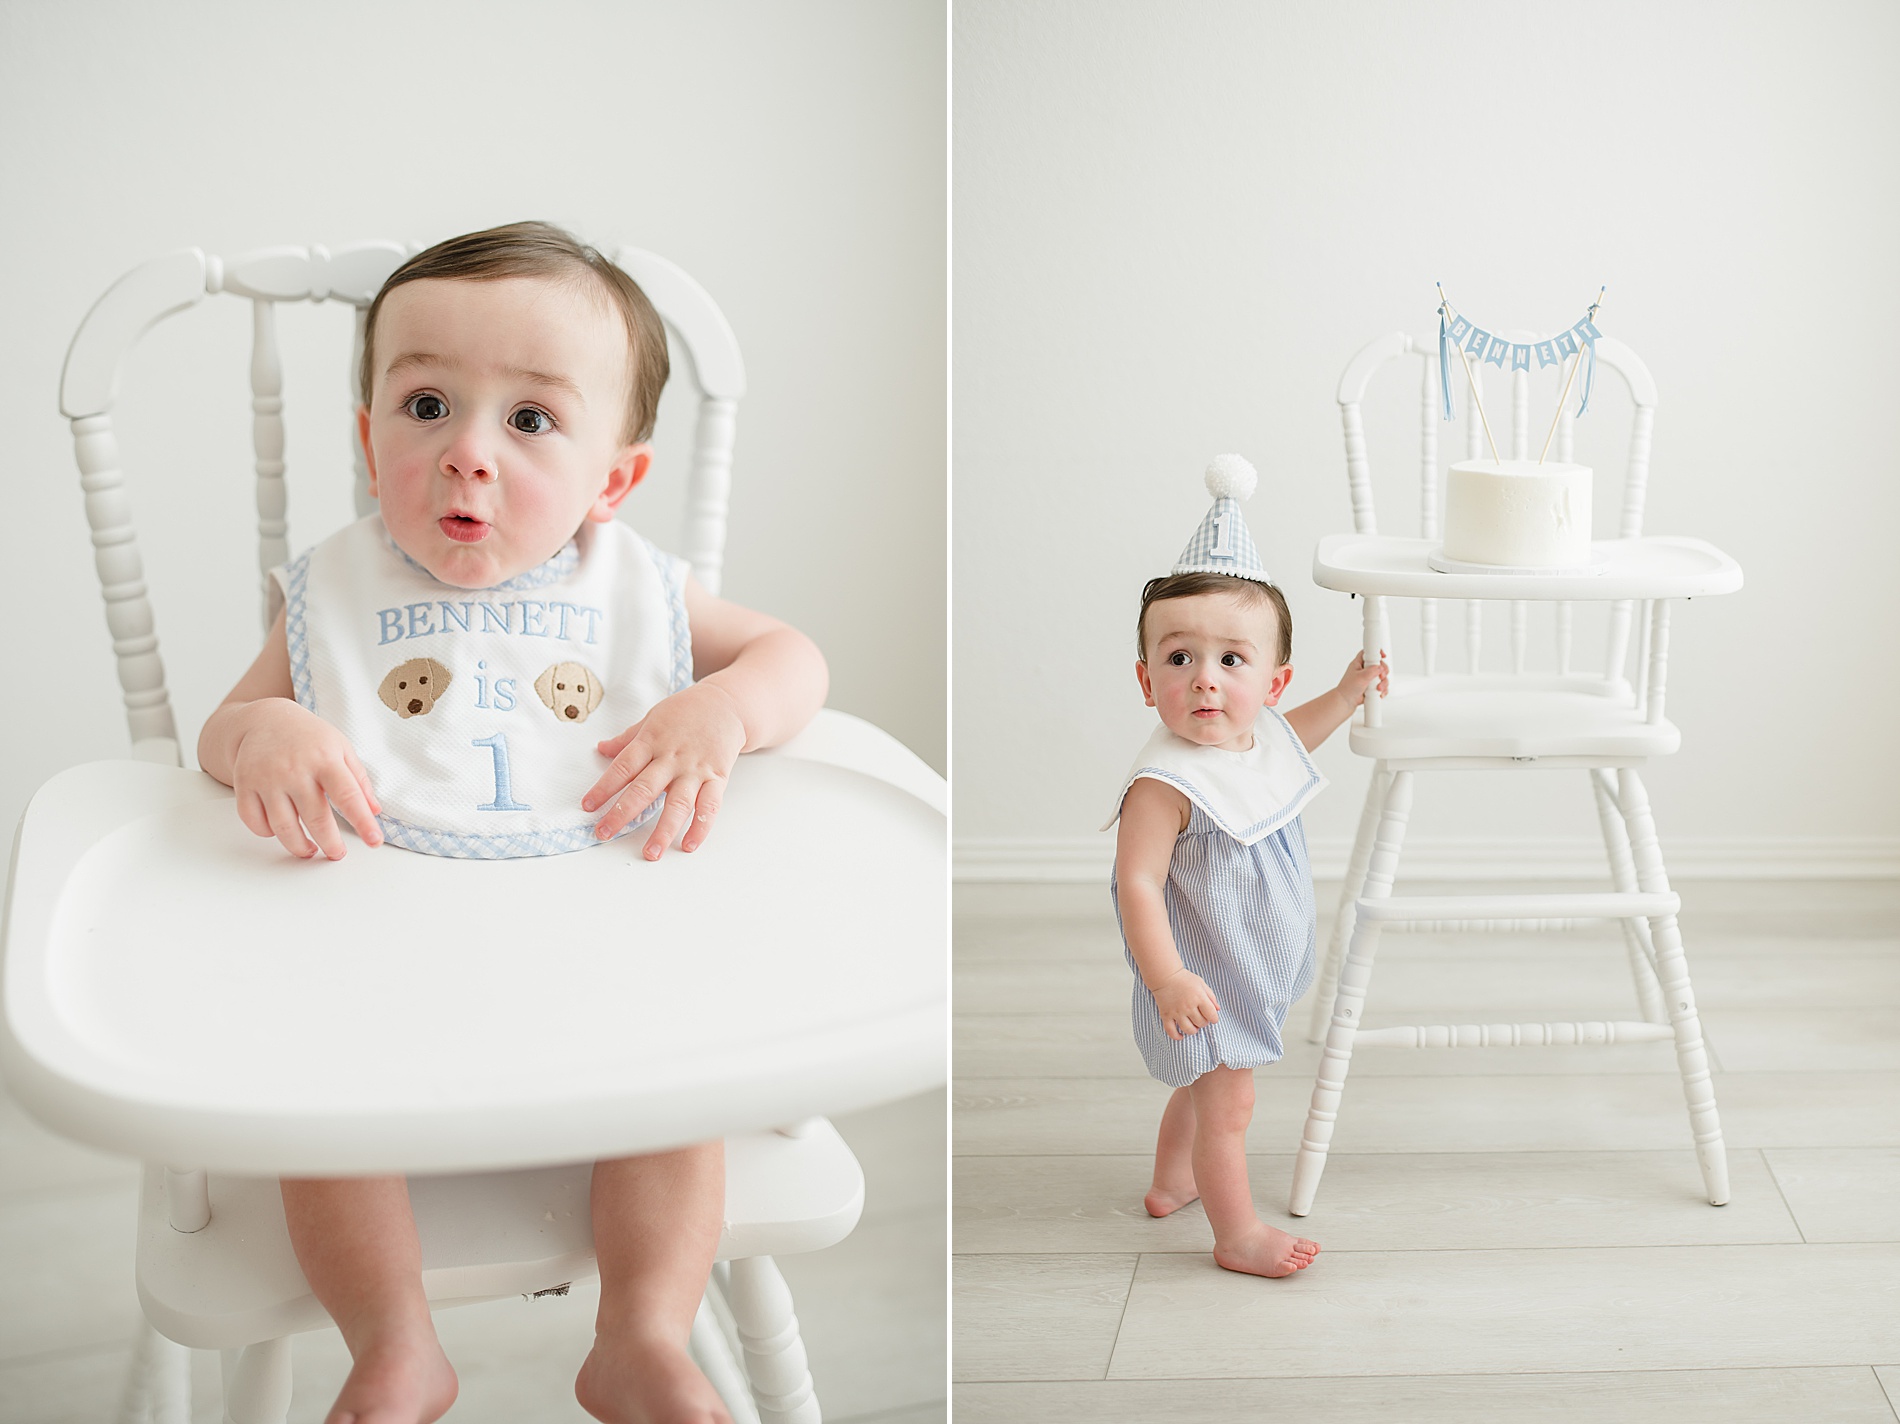 1 year milestone and cake smash session in studio taken by Lindsey Dutton Photography, a Dallas newborn photographer
